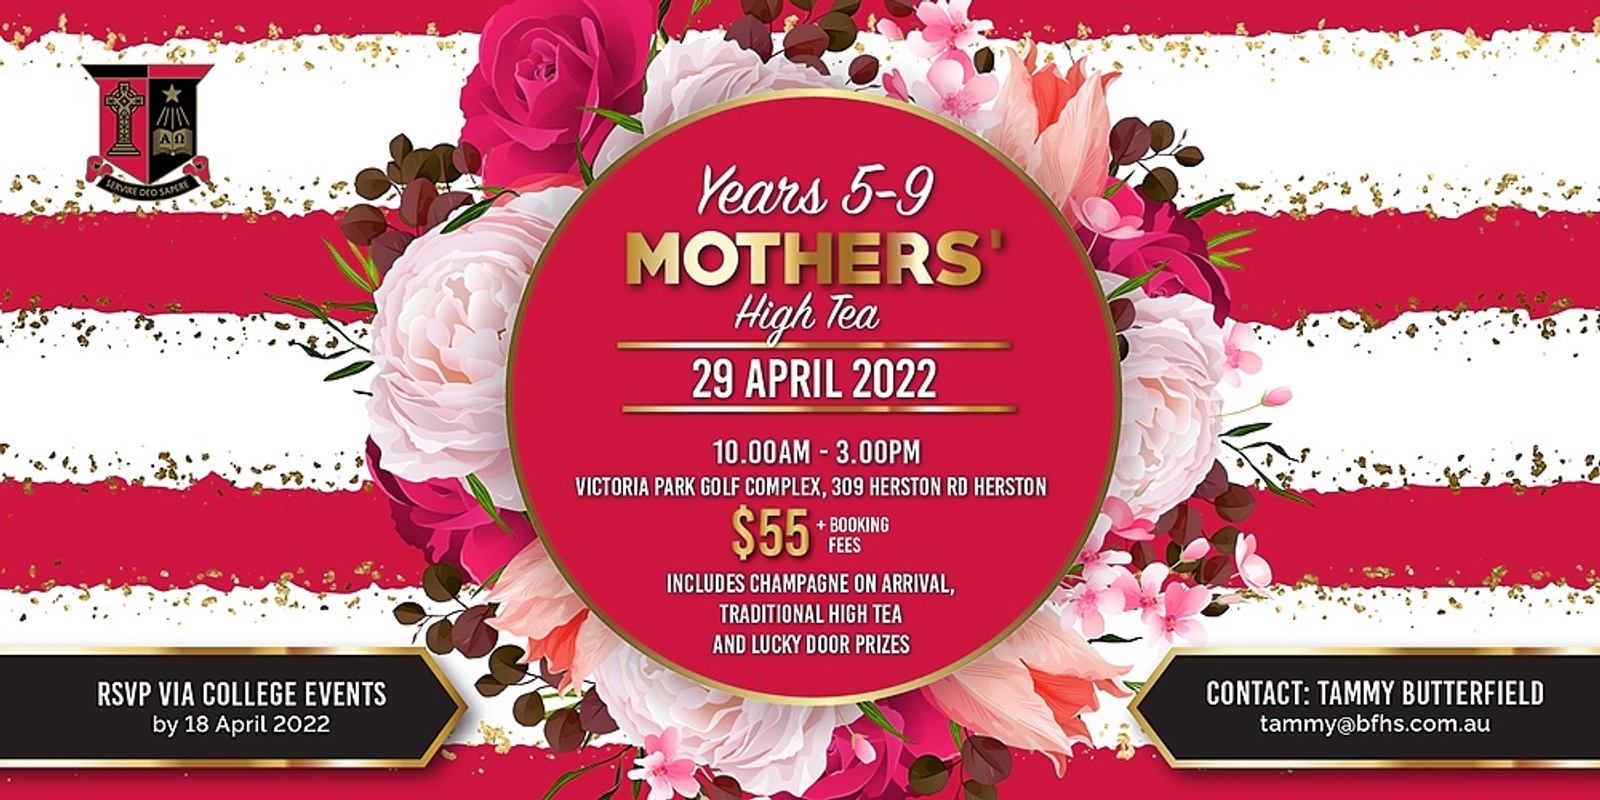 Banner image for 2022 Years 5 - 9 Mothers' High Tea